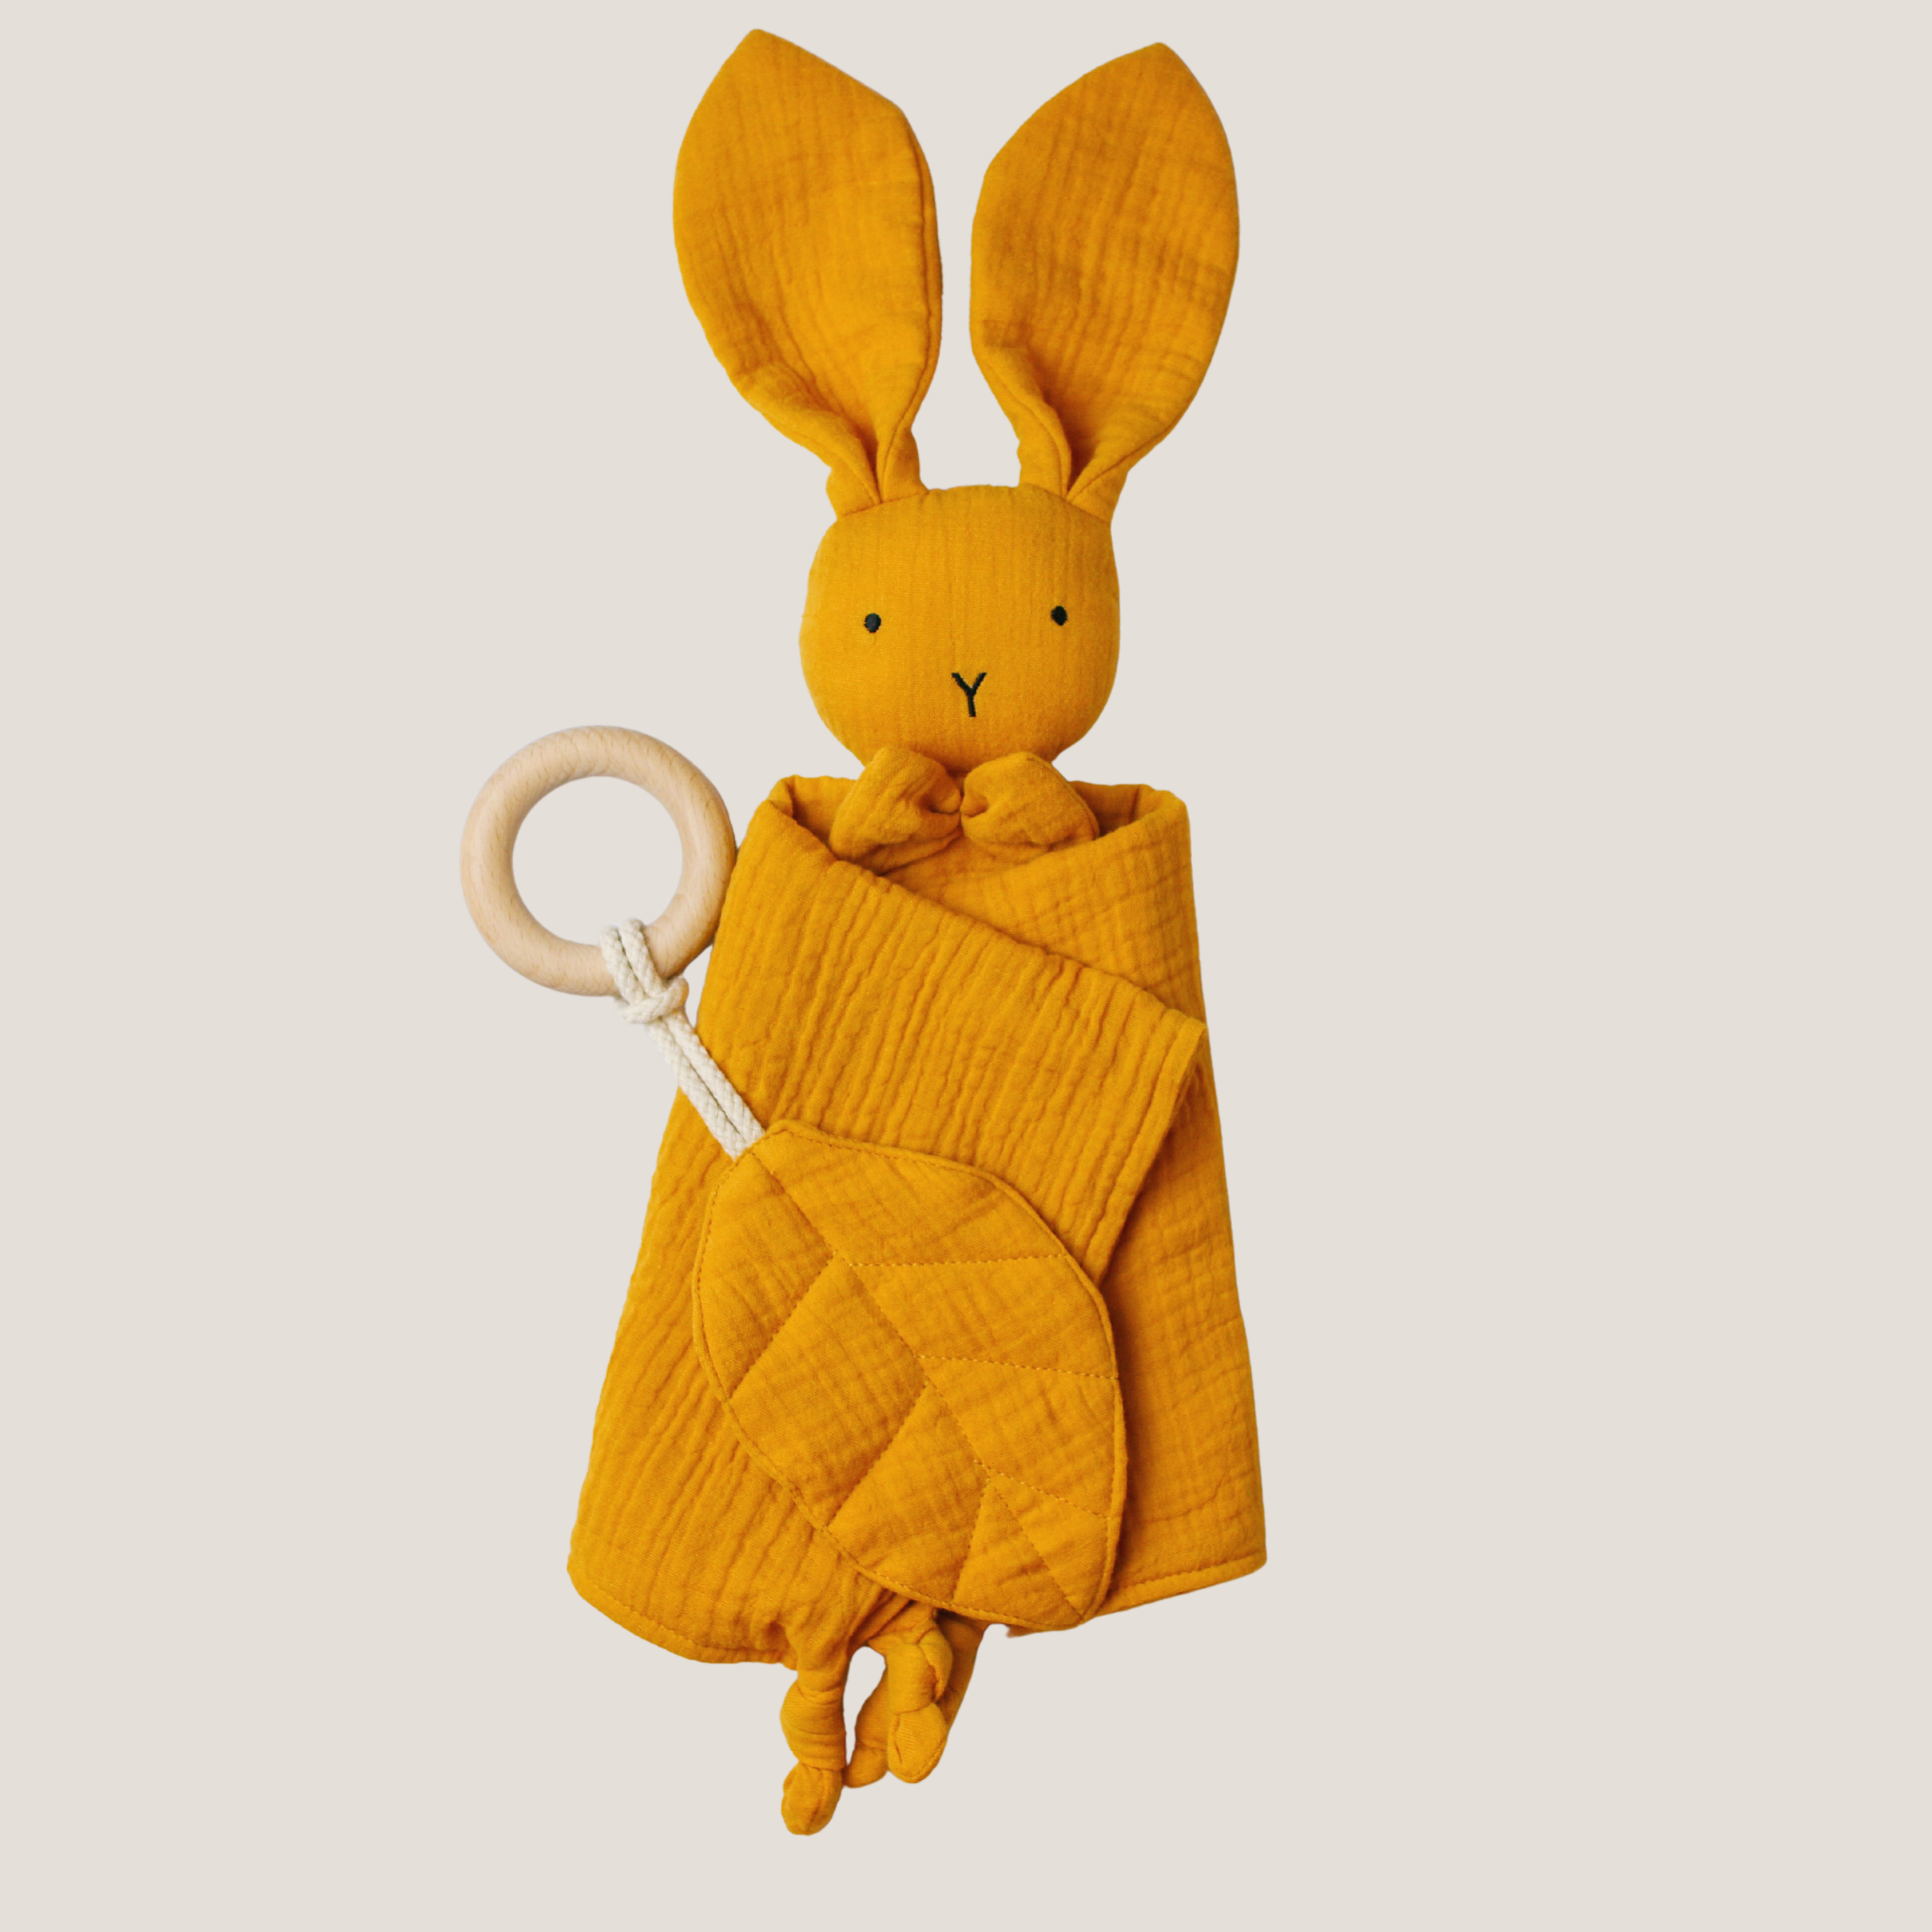 Snuggly Bunny Comforter & Ring Leaf Teether Bundle in Butterscotch